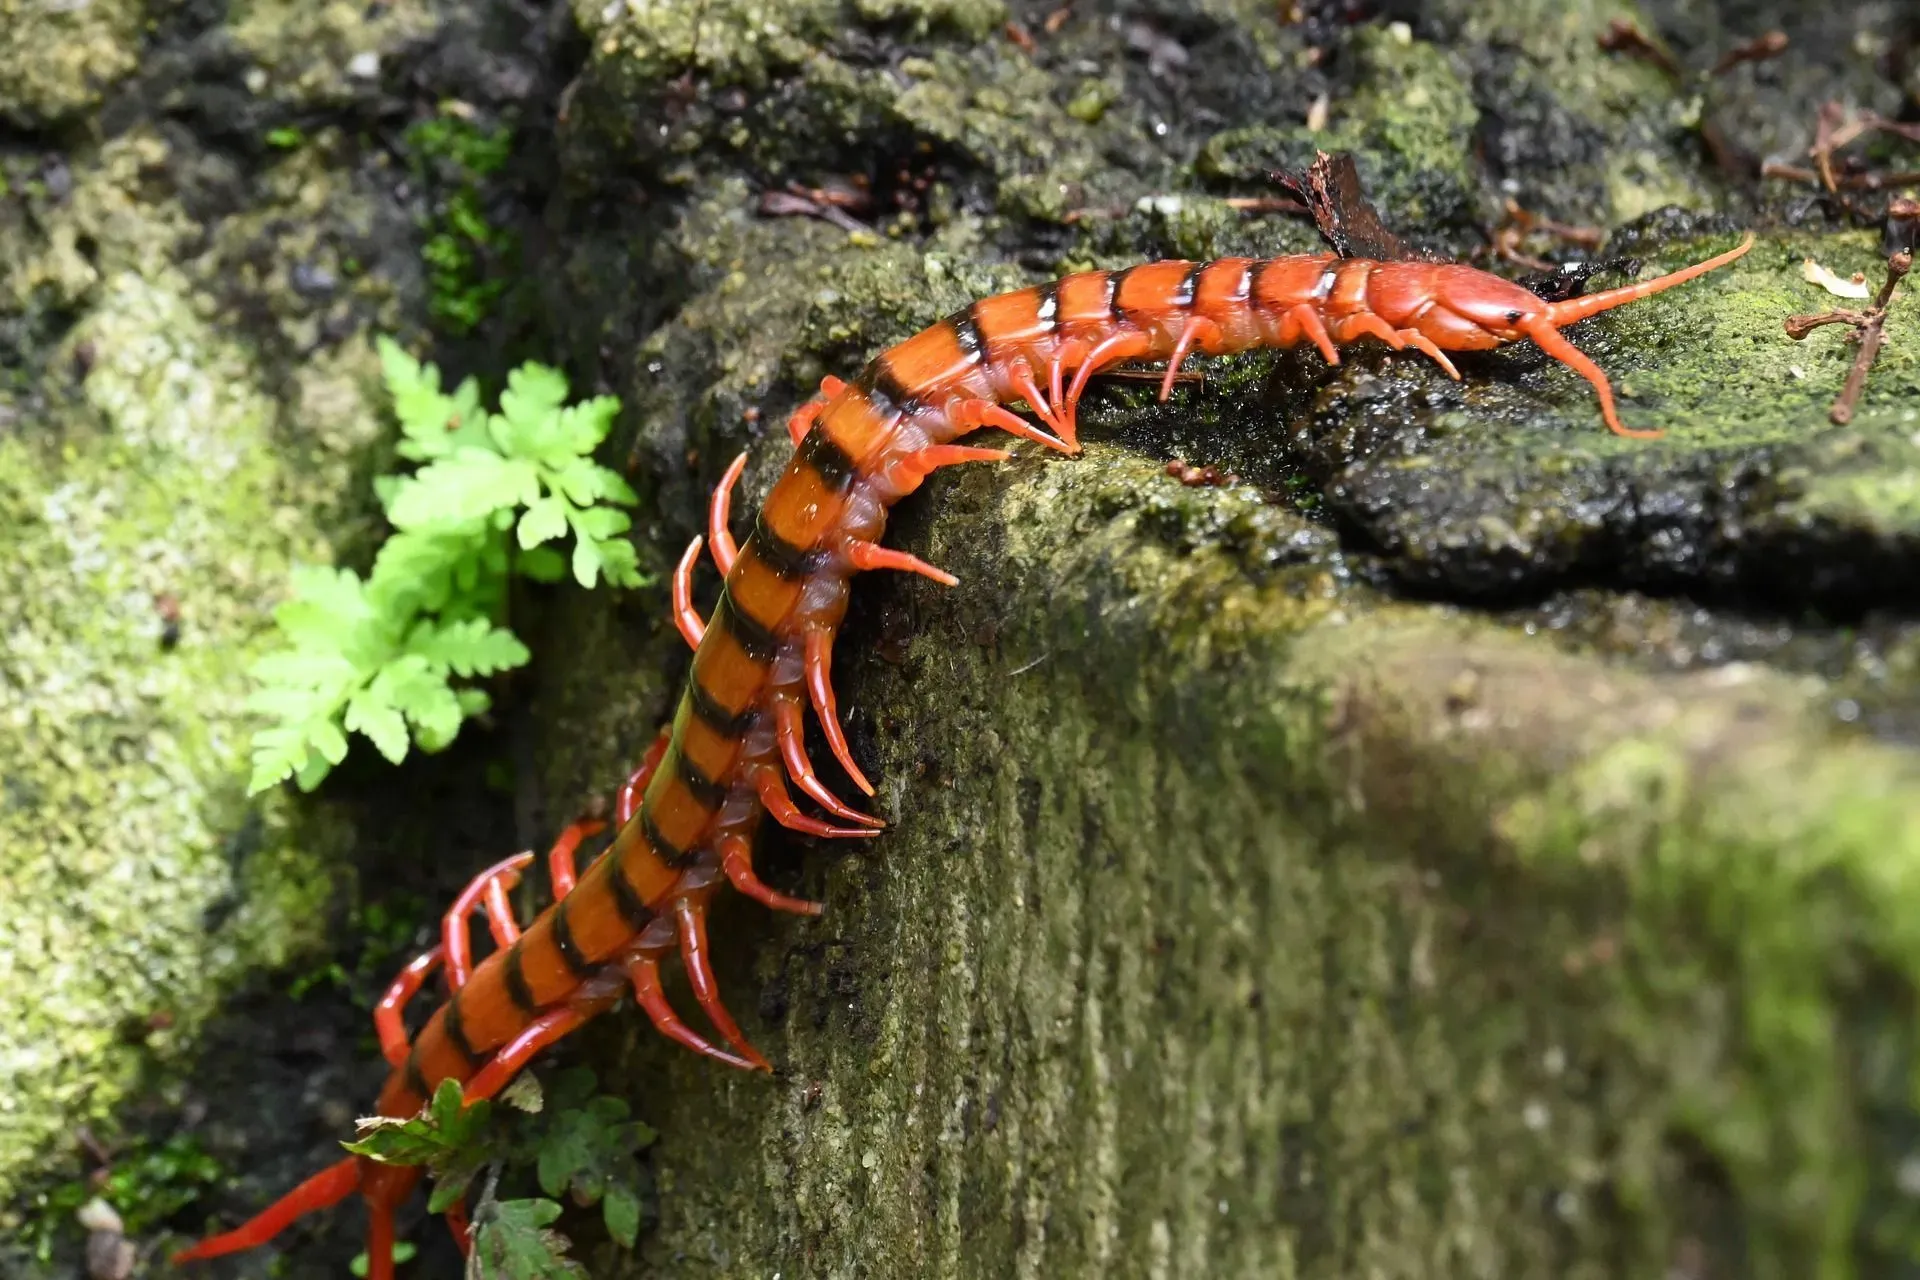 Even though centipedes look scary, you should think twice before squishing them. They can serve as pest controllers!